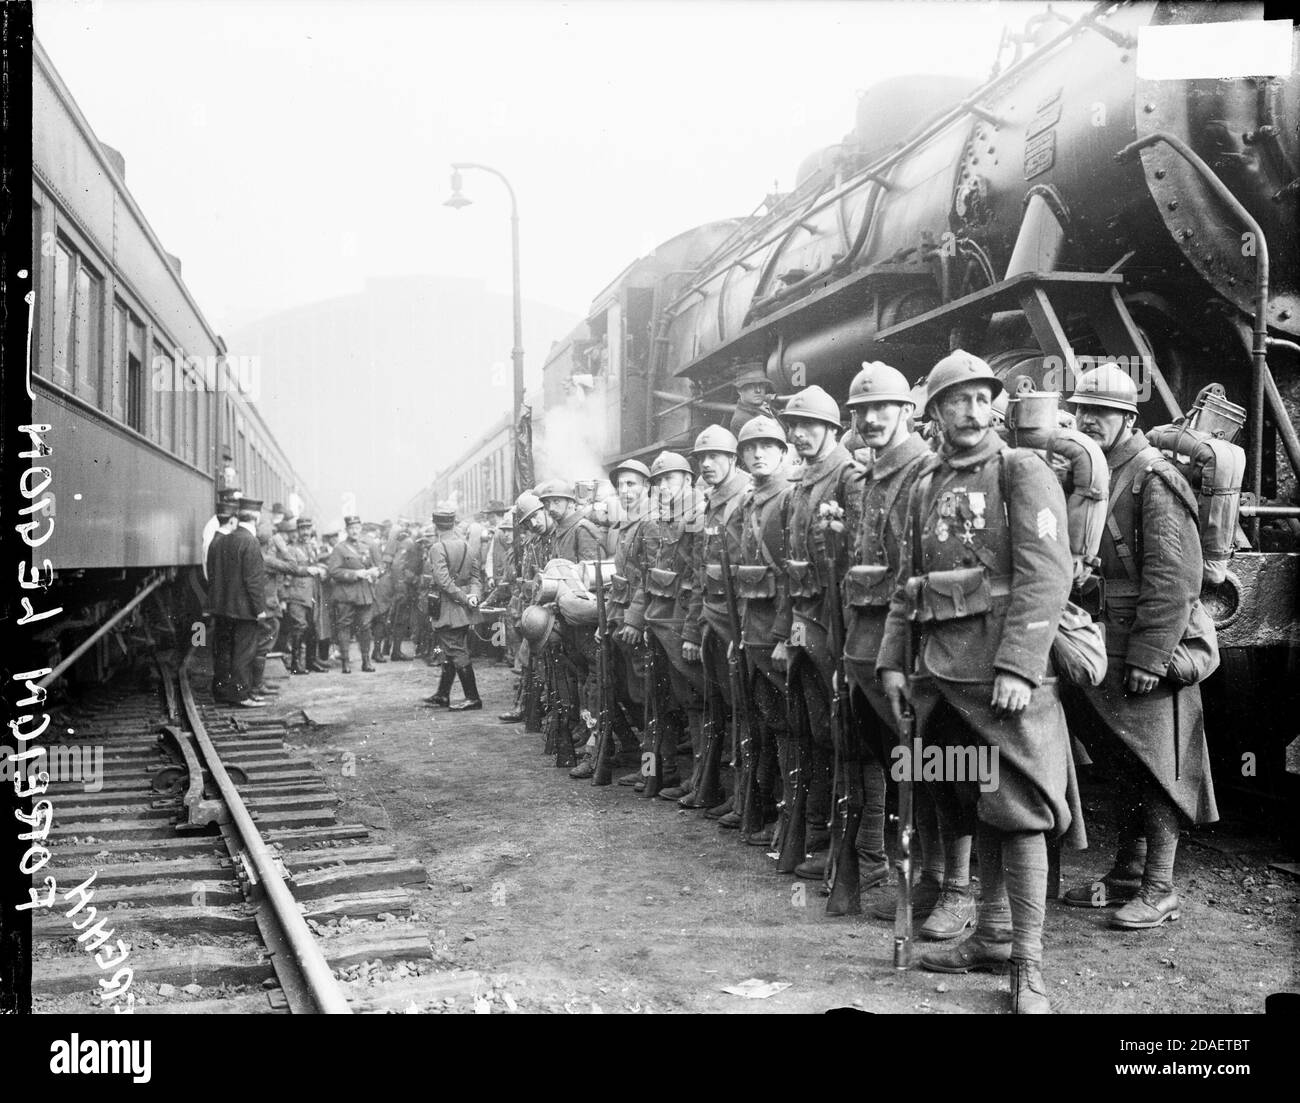 French Foreign Legion, with rifles and backpacks, standing in rows alongside a train upon their arrival in Chicago, Illinois, 1918. Stock Photo